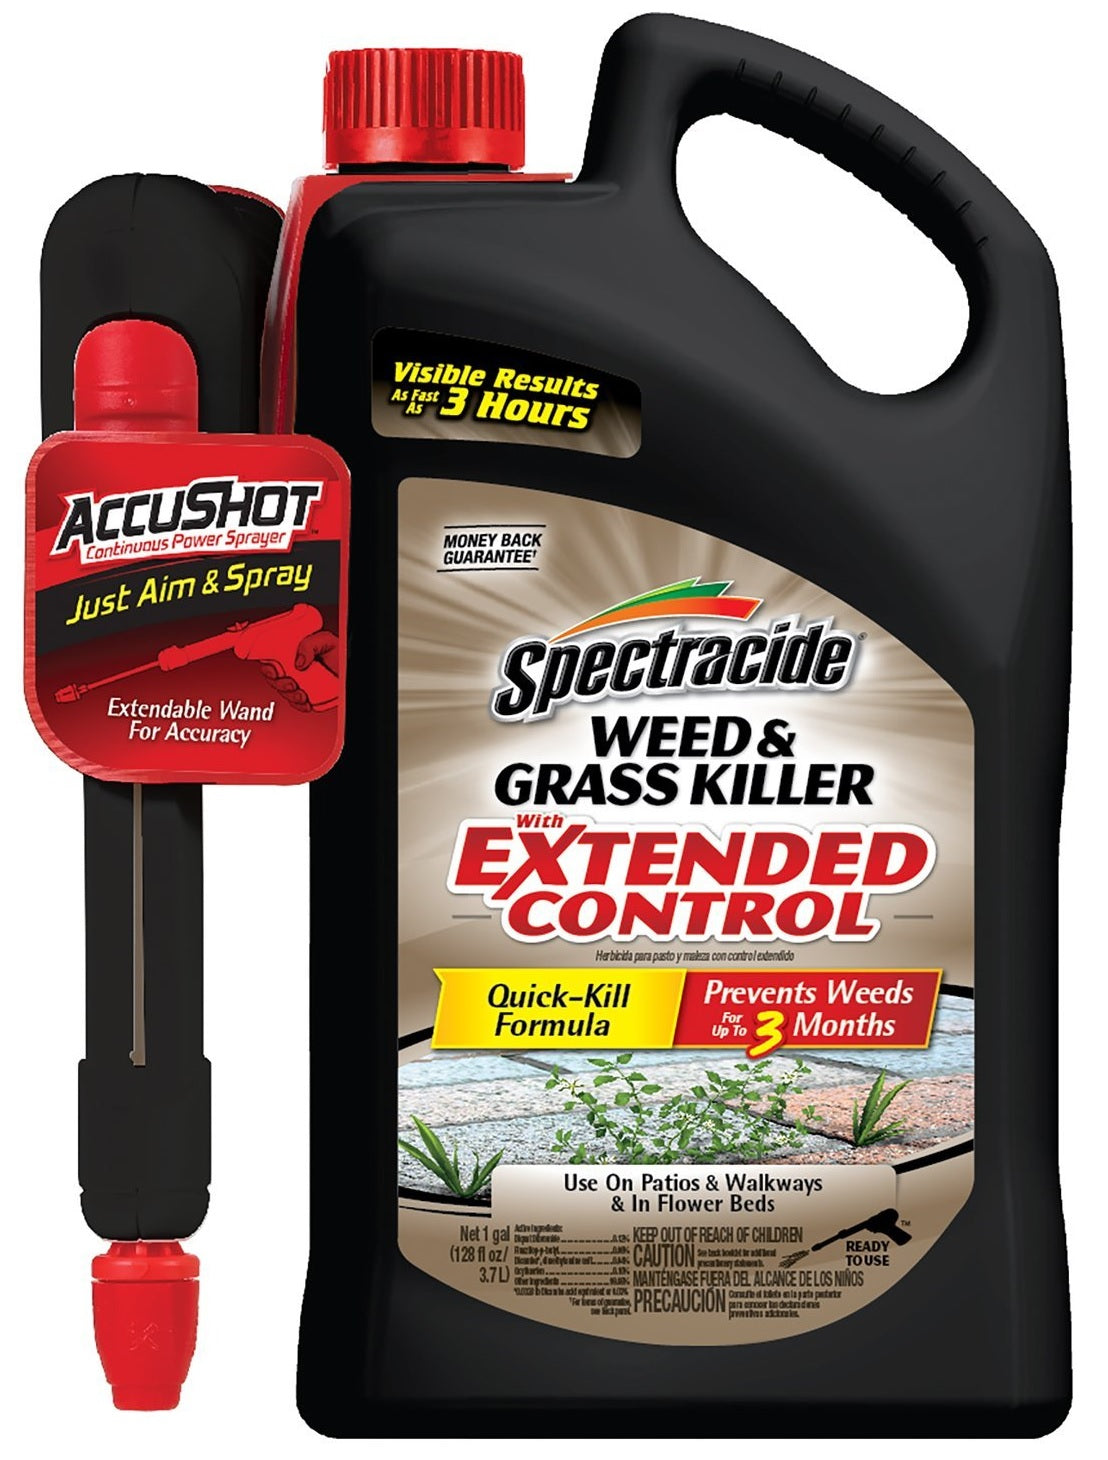 Spectracide HG-96462 Weed & Grass Killer with Extended Control AccuShot Sprayer, 128 Oz